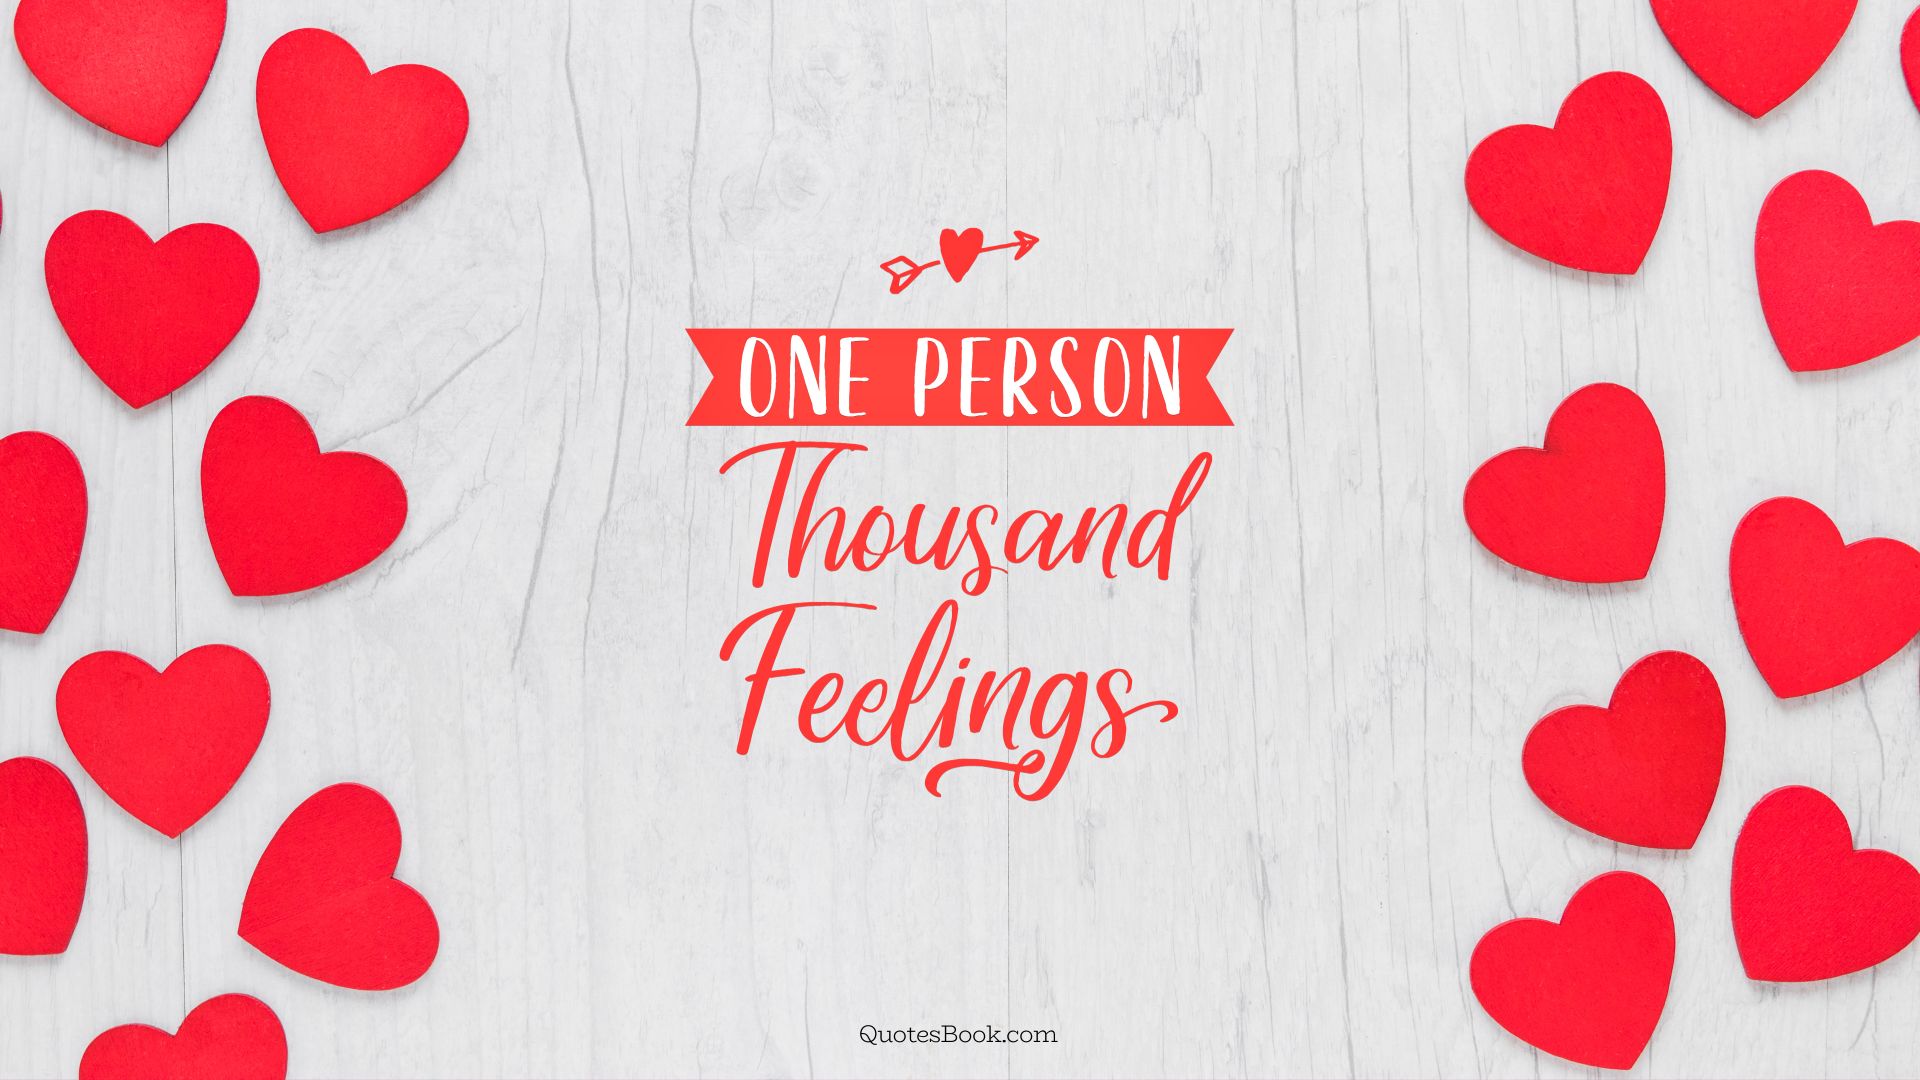 One Person Thousand Feelings
